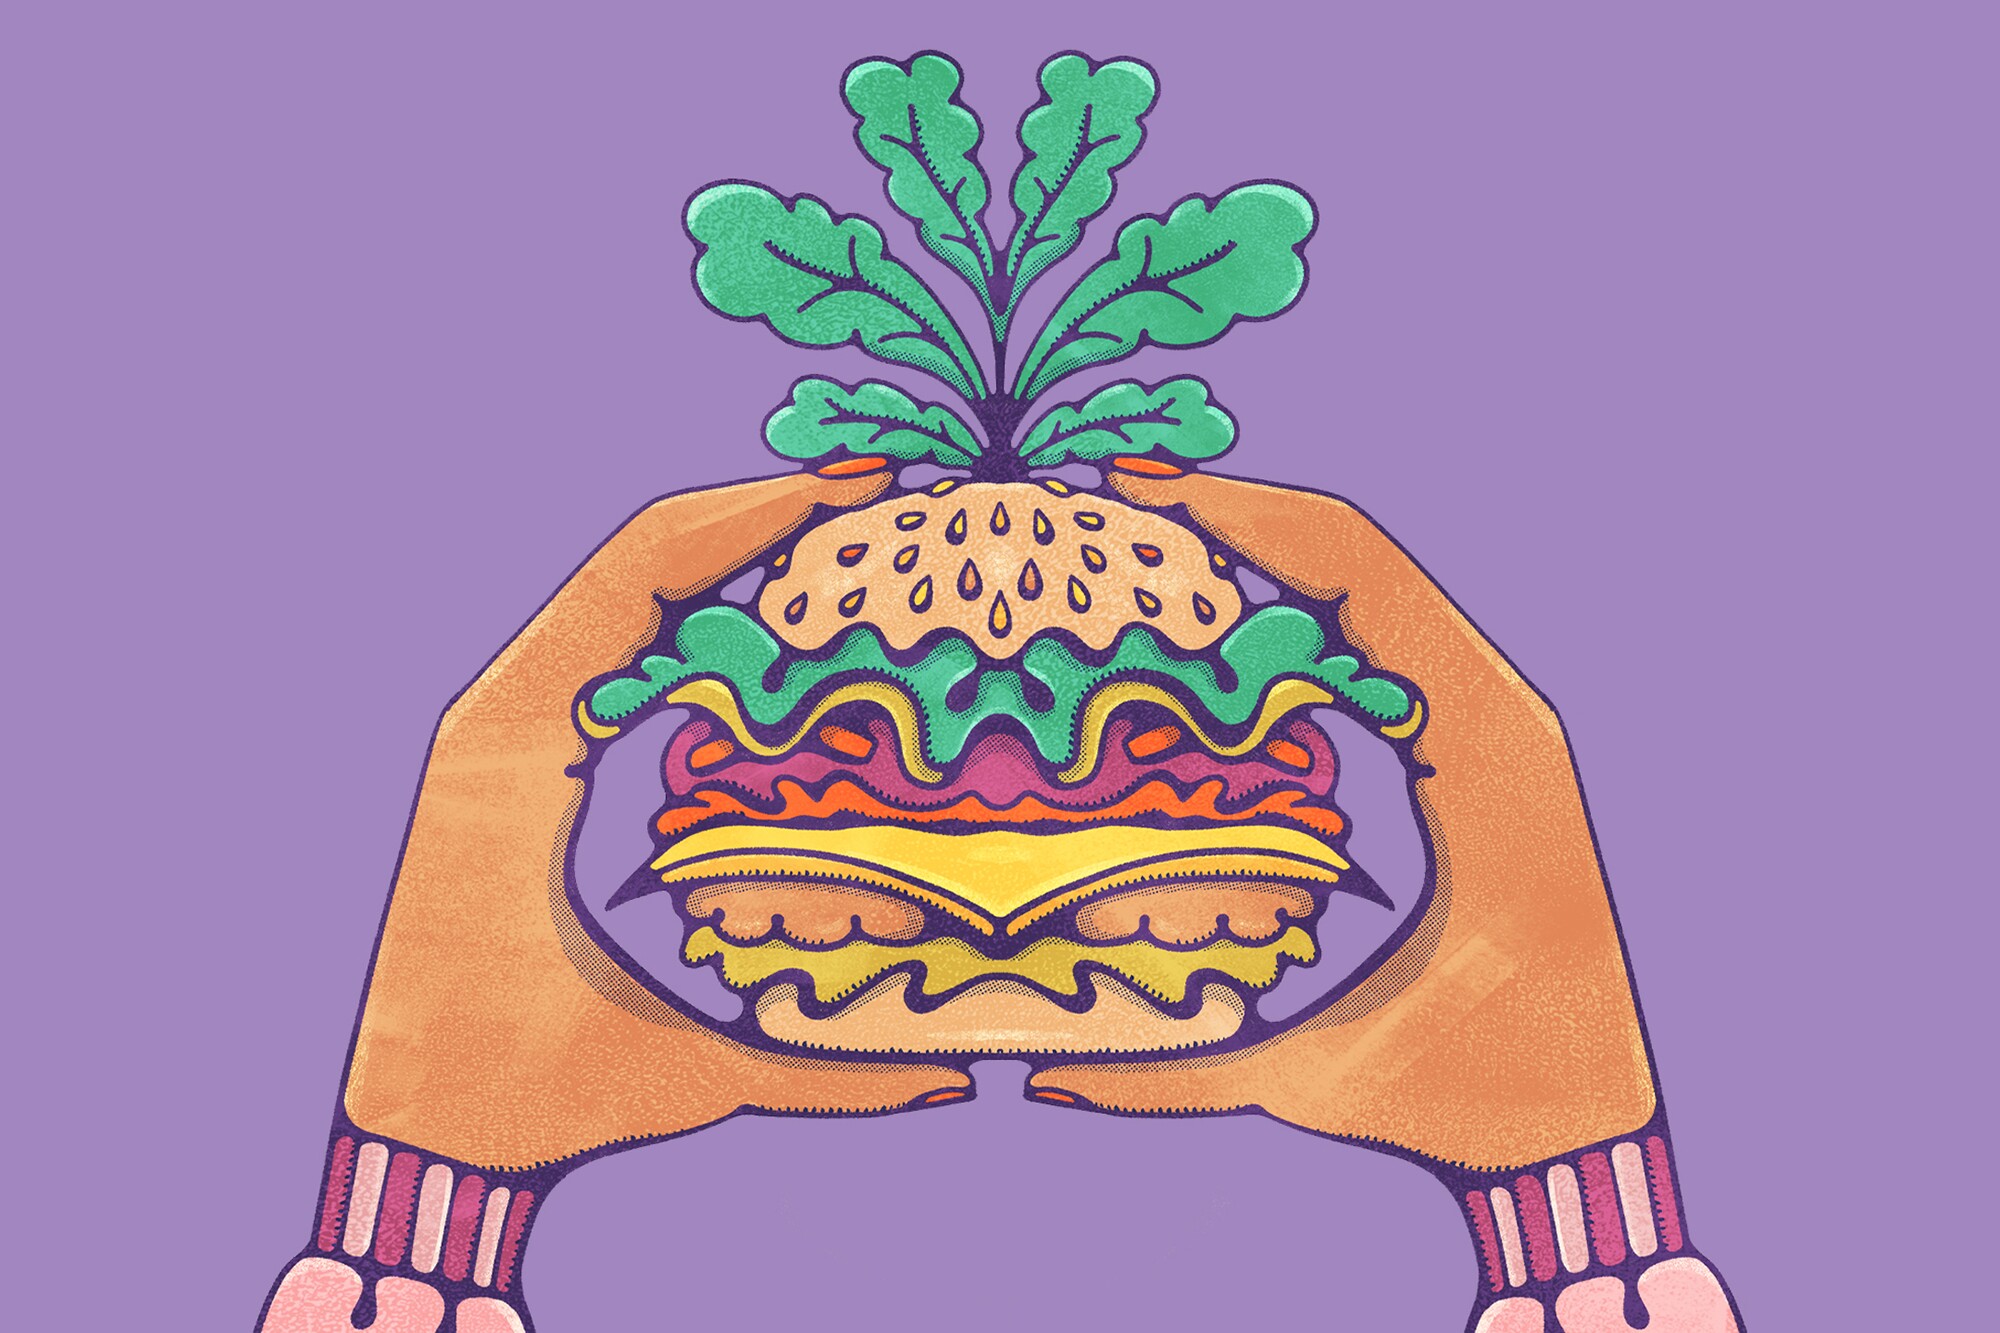 Illustration for story about protein alternatives